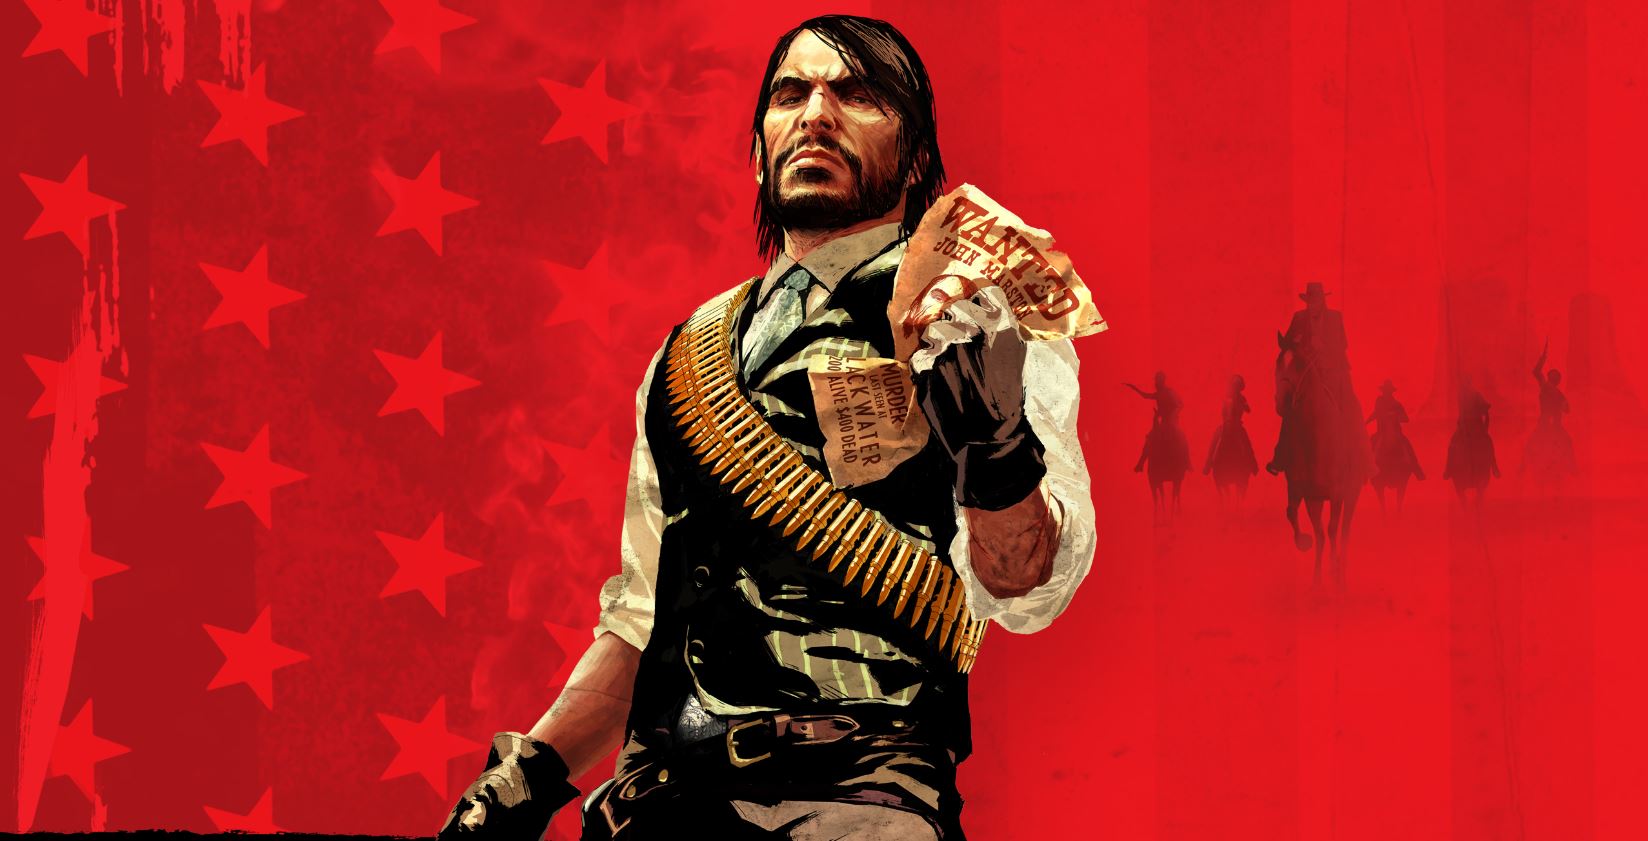 Red Dead Redemption remake for PS5 and Xbox Series X could be announced soon